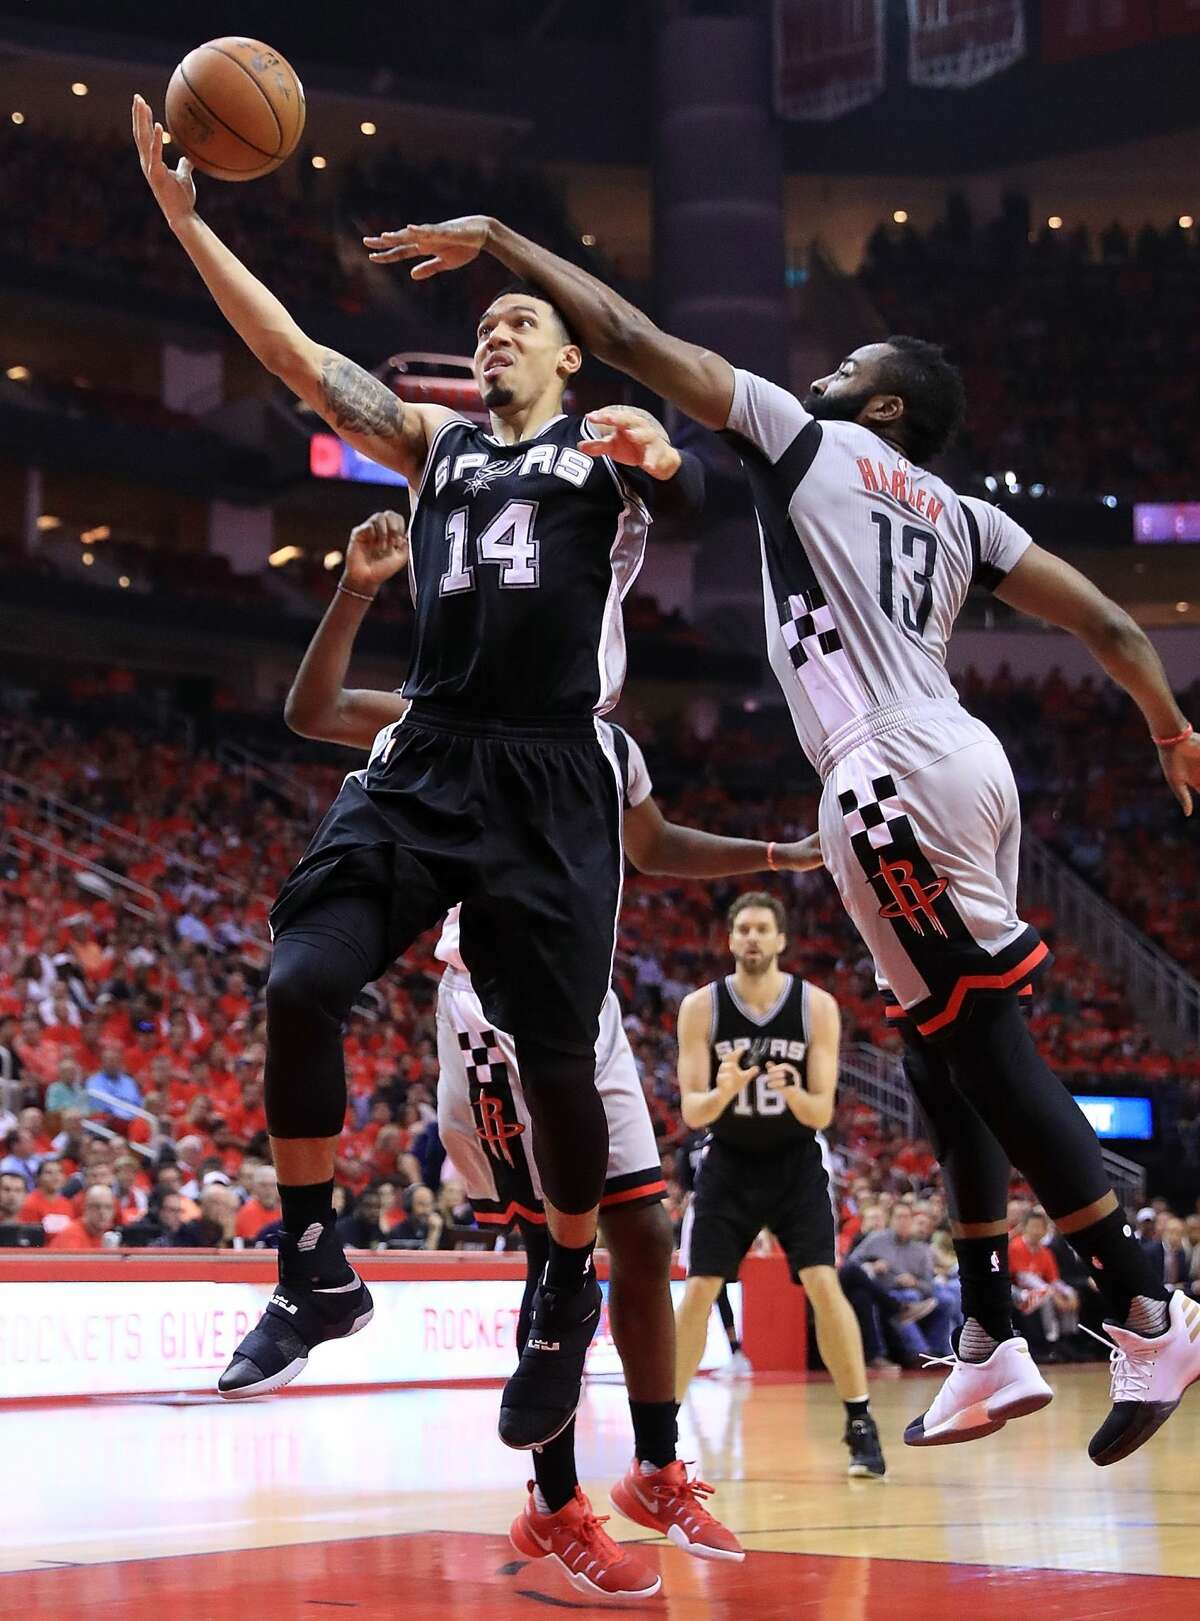 HOUSTON, TX - MAY 11: Danny Green #14 of the San Antonio Spurs drives between James Harden #13 and Clint Capela #15 of the Houston Rockets during Game Six of the NBA Western Conference Semi-Finals at Toyota Center on May 11, 2017 in Houston, Texas. NOTE TO USER: User expressly acknowledges and agrees that, by downloading and or using this photograph, User is consenting to the terms and conditions of the Getty Images License Agreement. (Photo by Ronald Martinez/Getty Images)